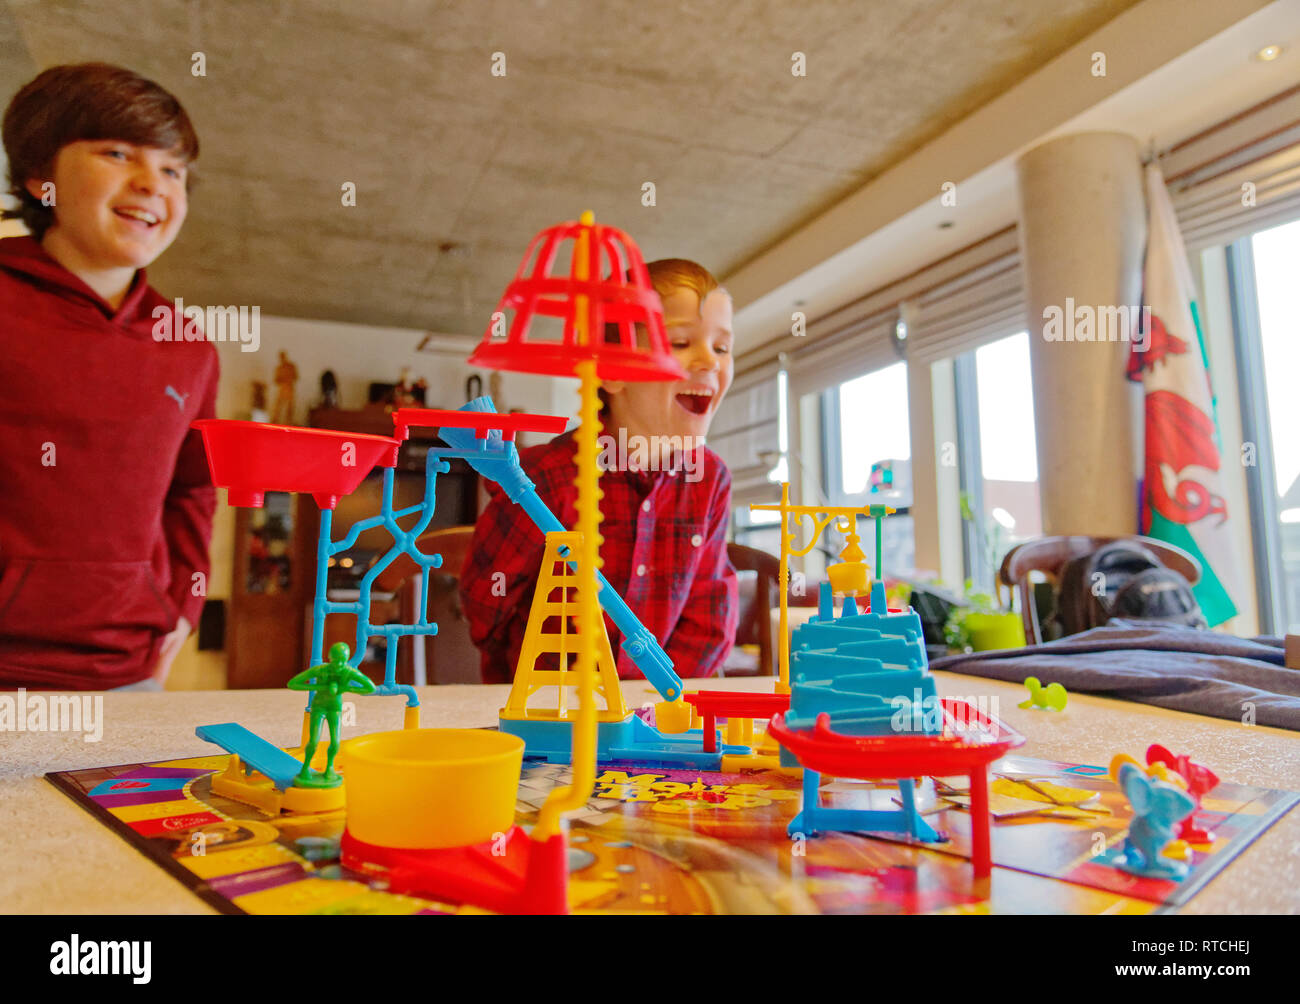 https://c8.alamy.com/comp/RTCHEJ/two-boys-6-and-11-yrs-old-laughing-together-playing-mouse-trap-board-game-RTCHEJ.jpg